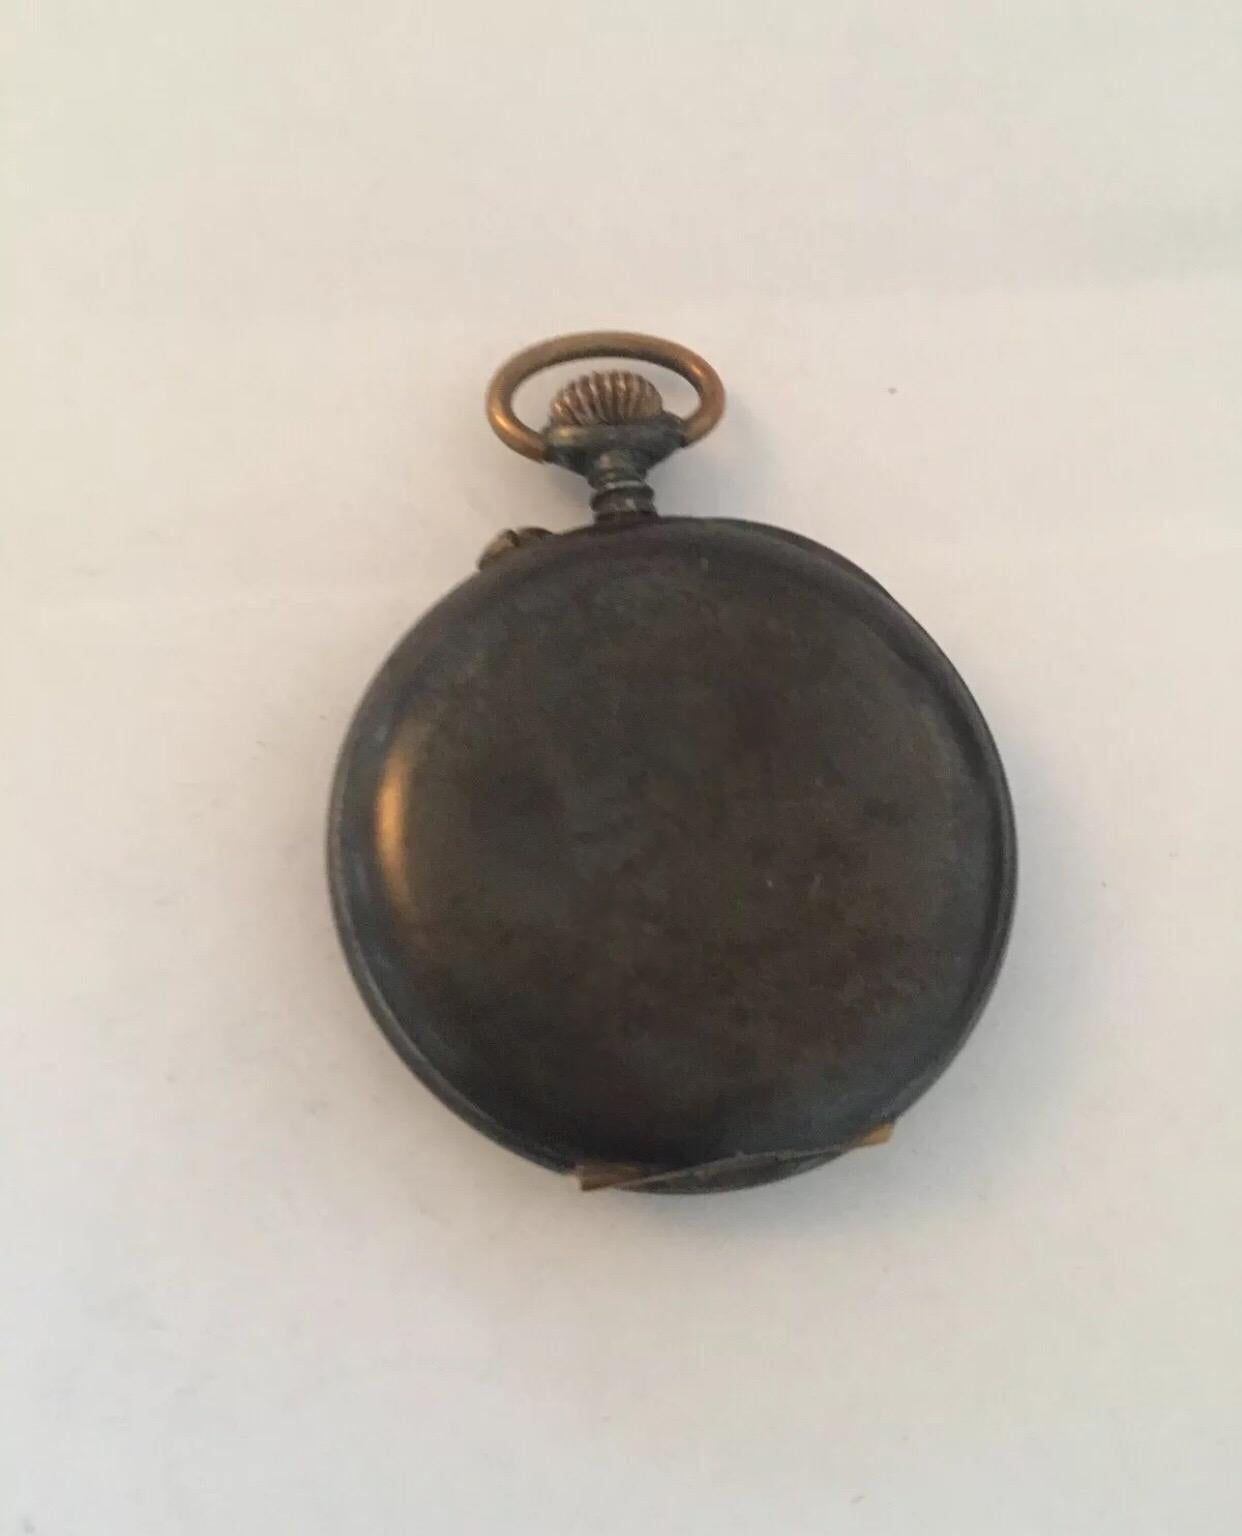 This beautiful 49mm diameter Keyless Stem winding antique gunmetal pocket watch. This watch is good working condition and it is ticking well. Visible signs of ageing and wear with tiny and light surface marks on the case. Please study the images